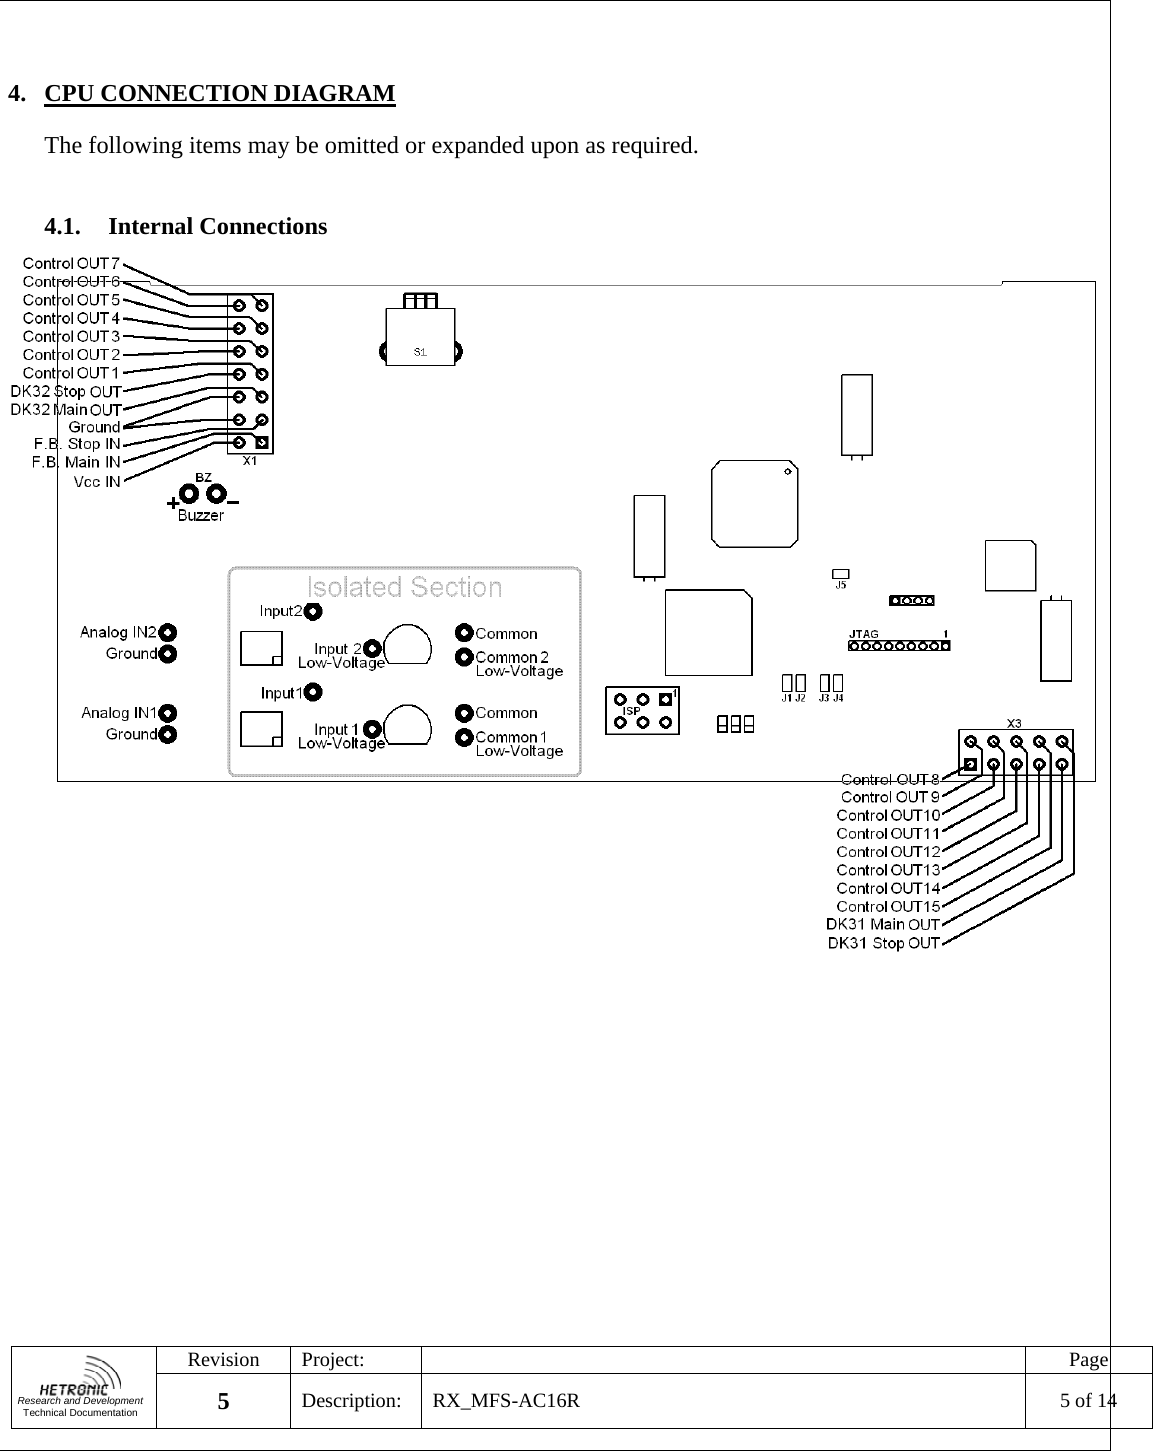   Research and Development Technical Documentation Revision Project:    Page 5  Description: RX_MFS-AC16R  5 of 14   4. CPU CONNECTION DIAGRAM The following items may be omitted or expanded upon as required.  4.1. Internal Connections  